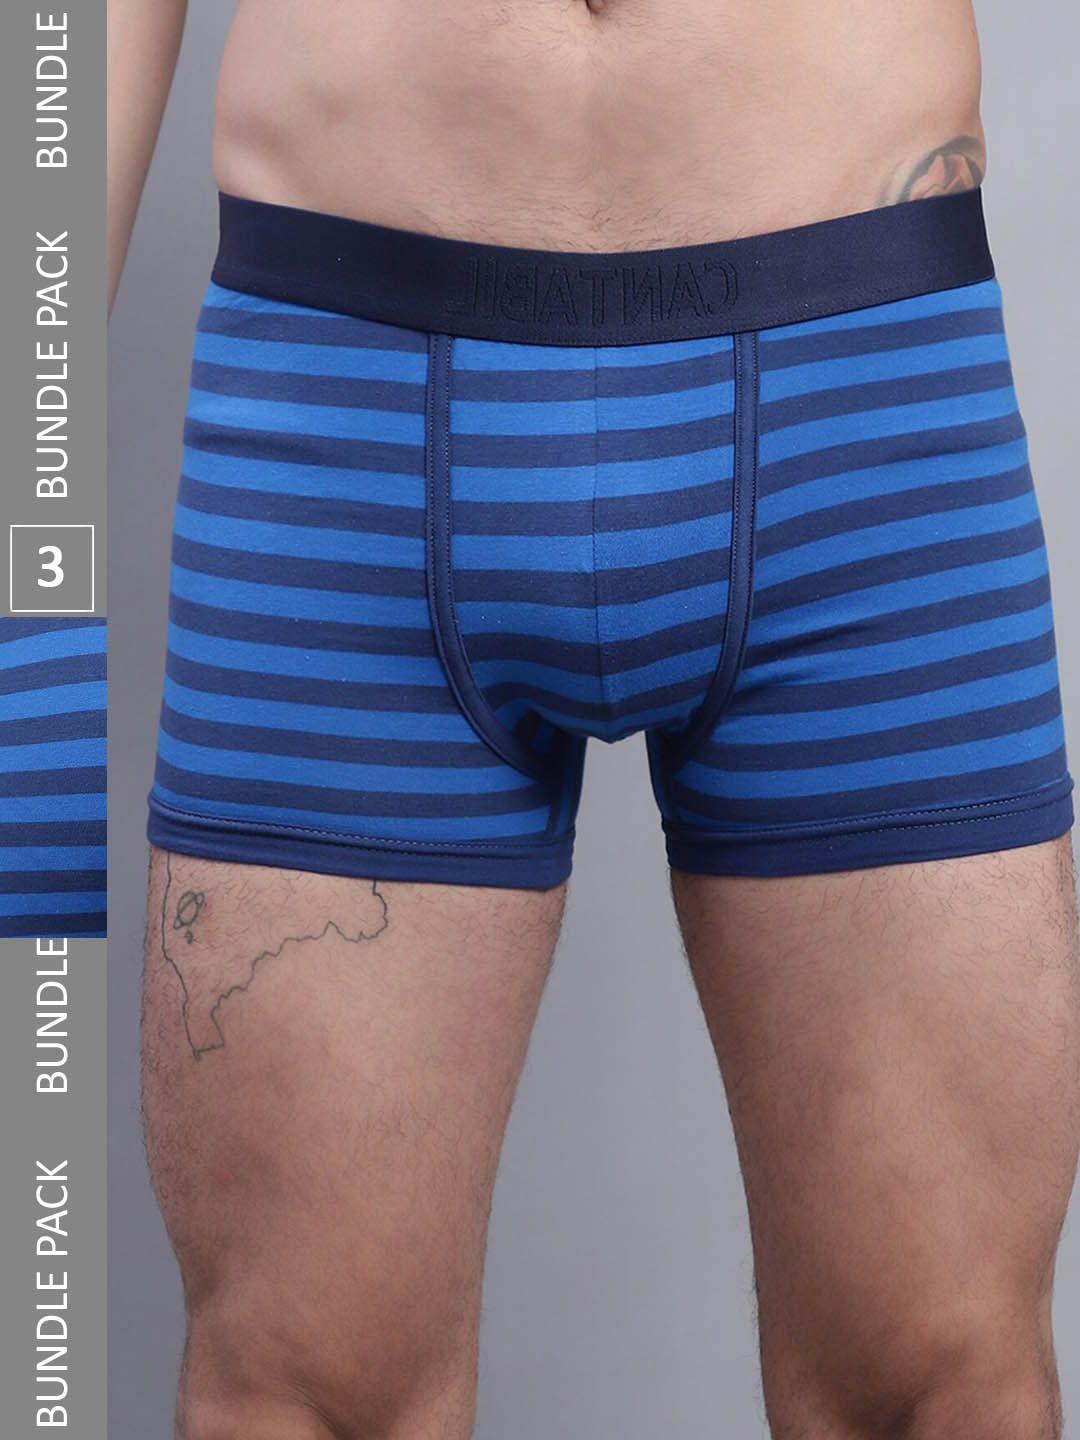 cantabil men pack of 3 striped basic briefs